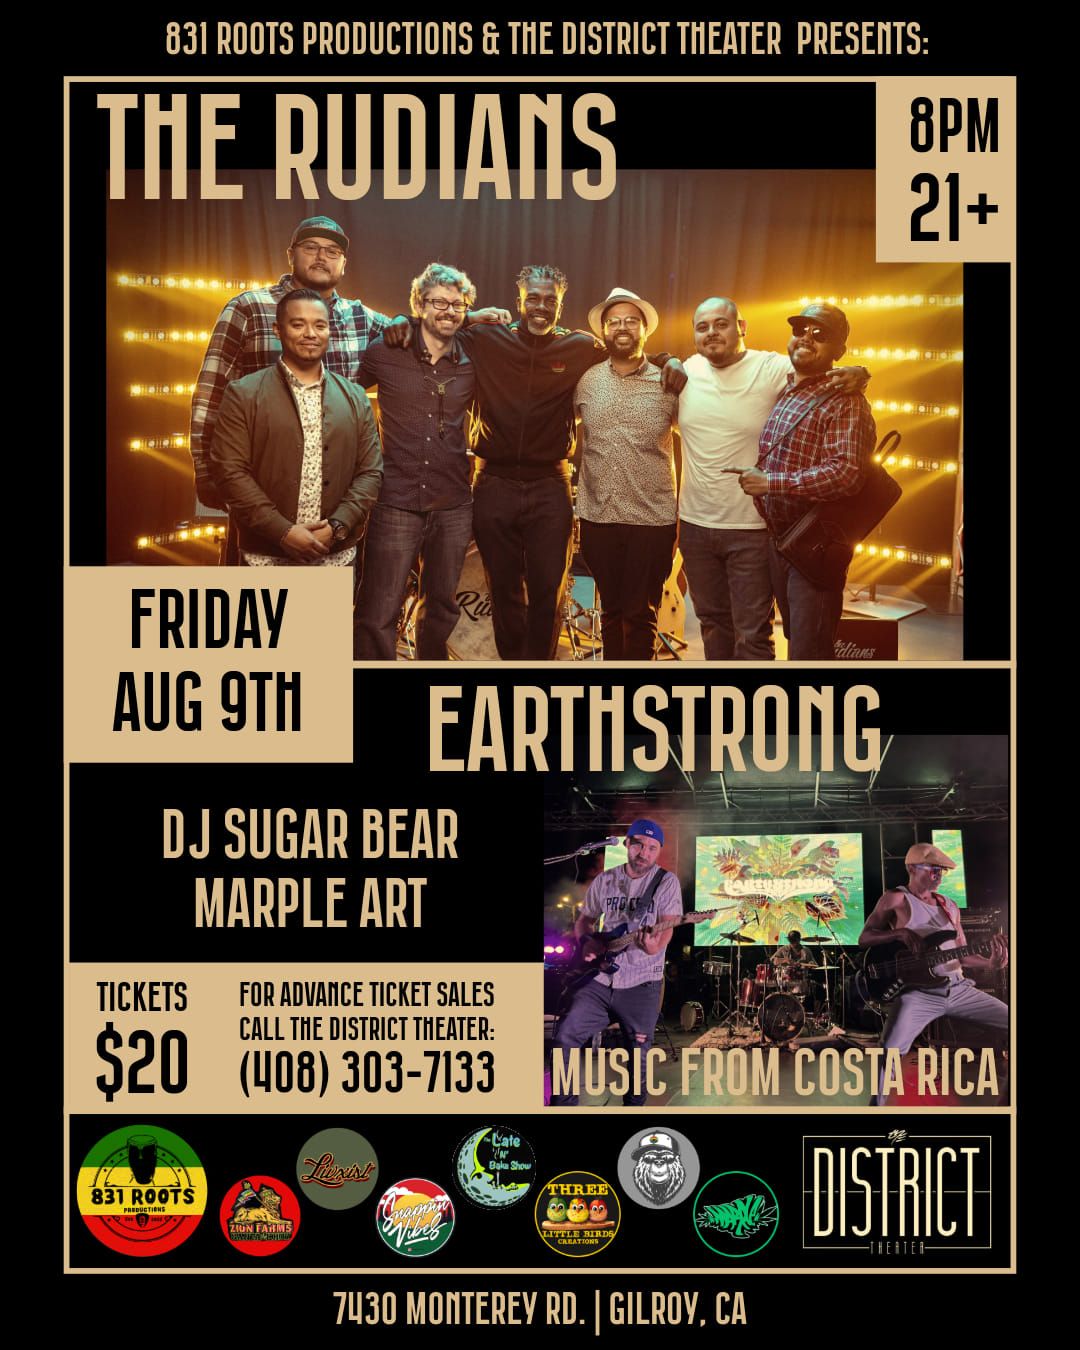 831 Roots Productions & The District Theater present The Rudians & Earthstrong 